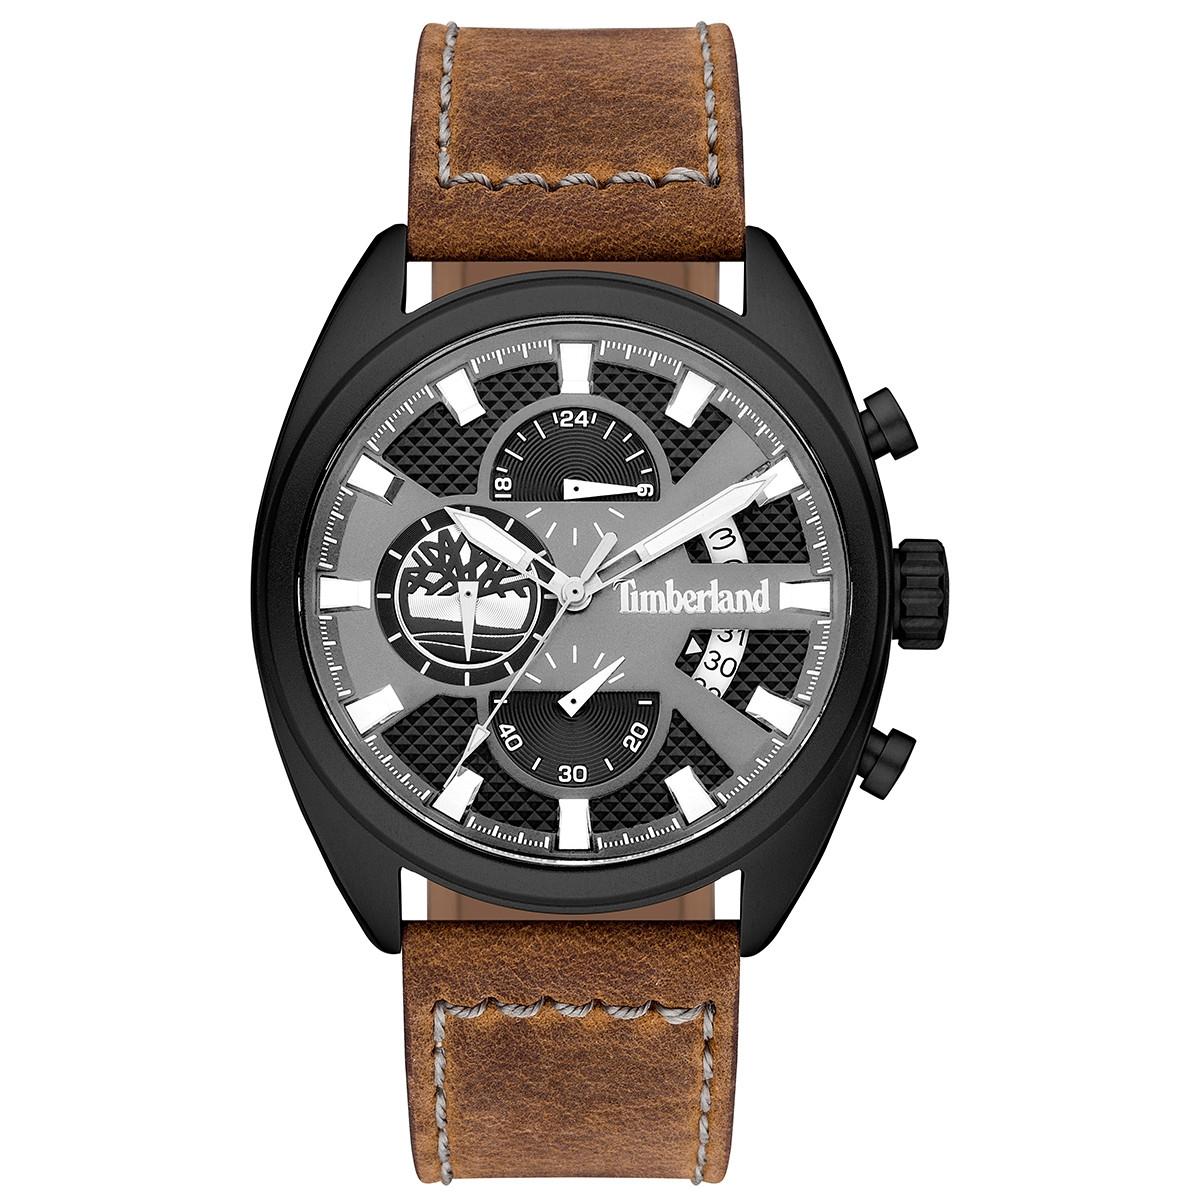 TIMBERLAND SEABROOK - TBL15640JLB/61, Black case with Brown Leather Strap